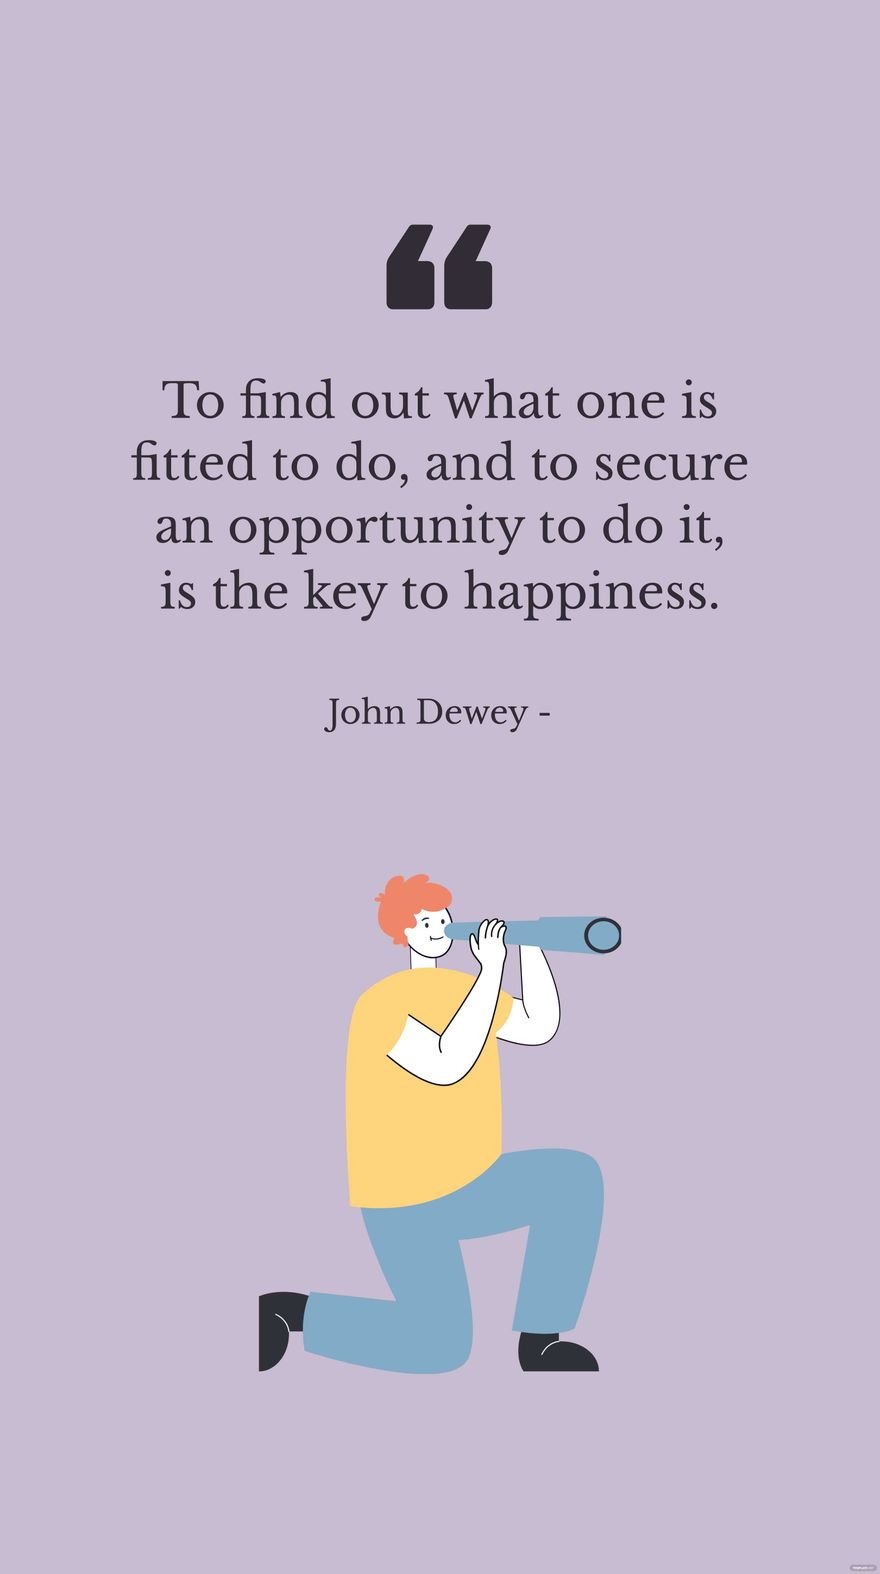 Free John Dewey - To find out what one is fitted to do, and to secure an opportunity to do it, is the key to happiness. in JPG